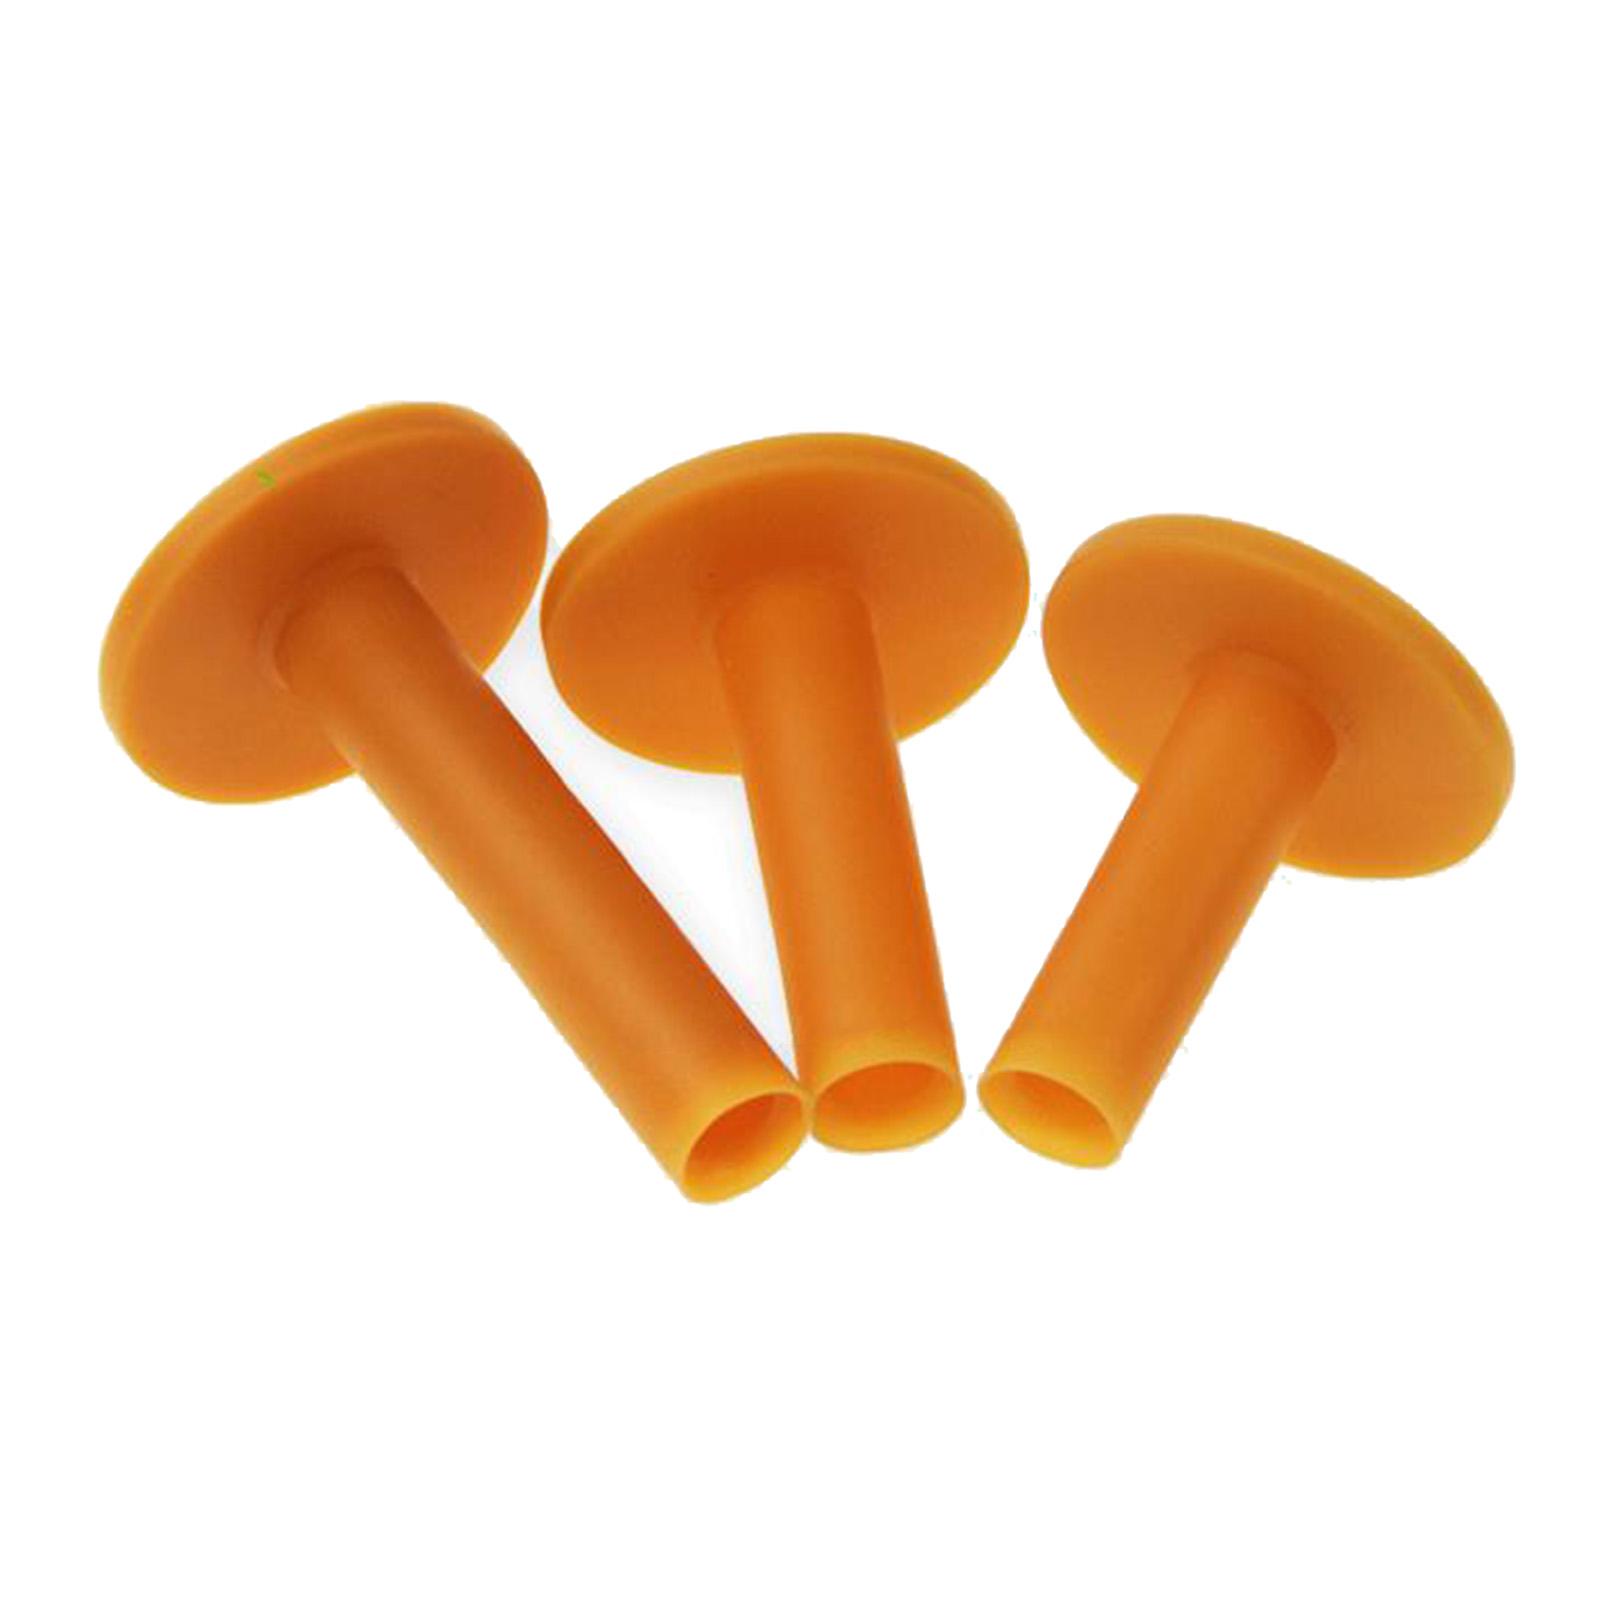 5pcs Rubber Driving Golf Tees Holder Rubber Driving Range Practice  68mm